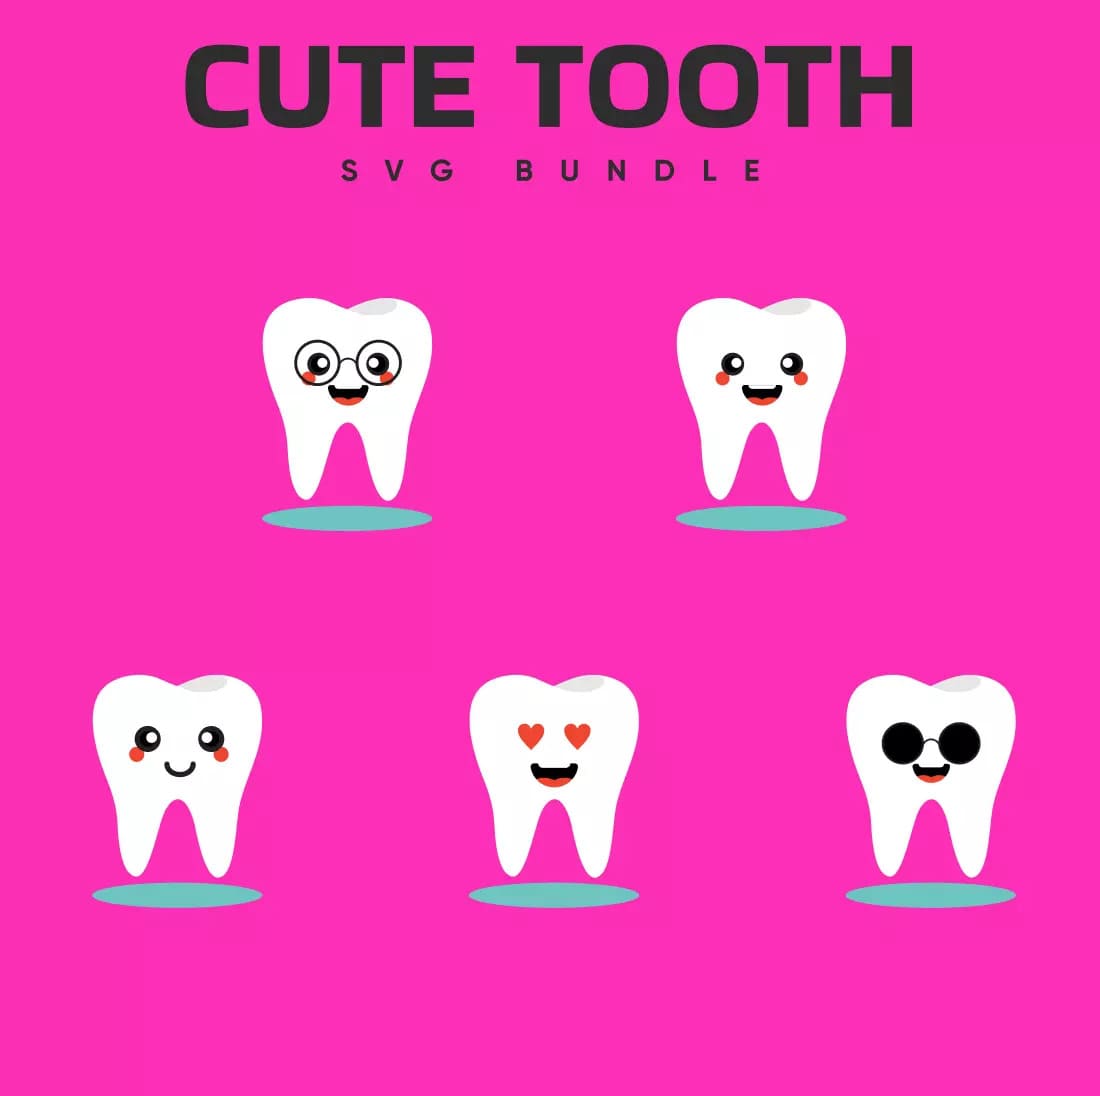 Cute Tooth SVG Bundle Preview.